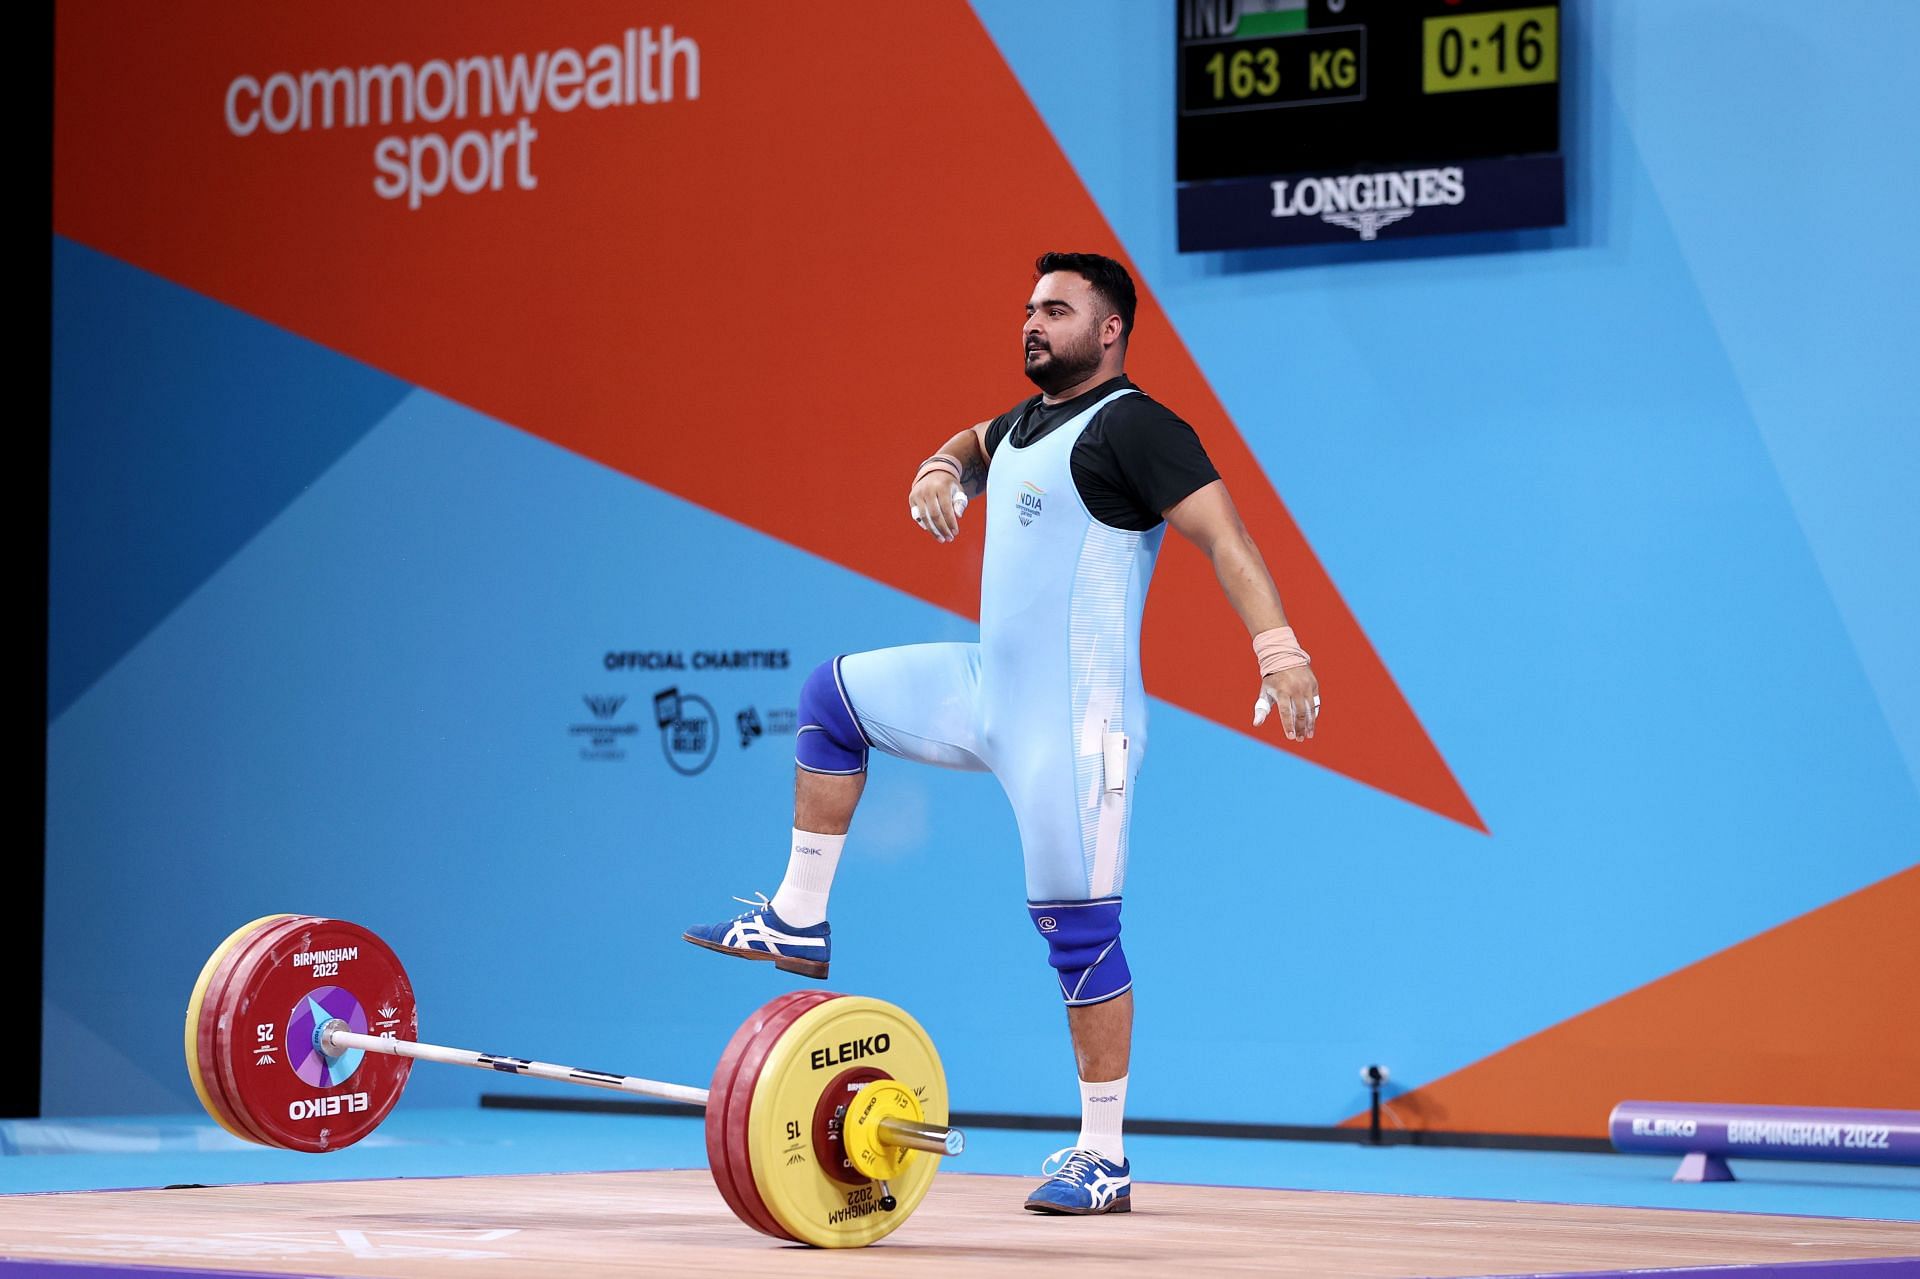 Indian weightlifter Lovepreet Singh at CWG 2022. (PC: Getty Images)